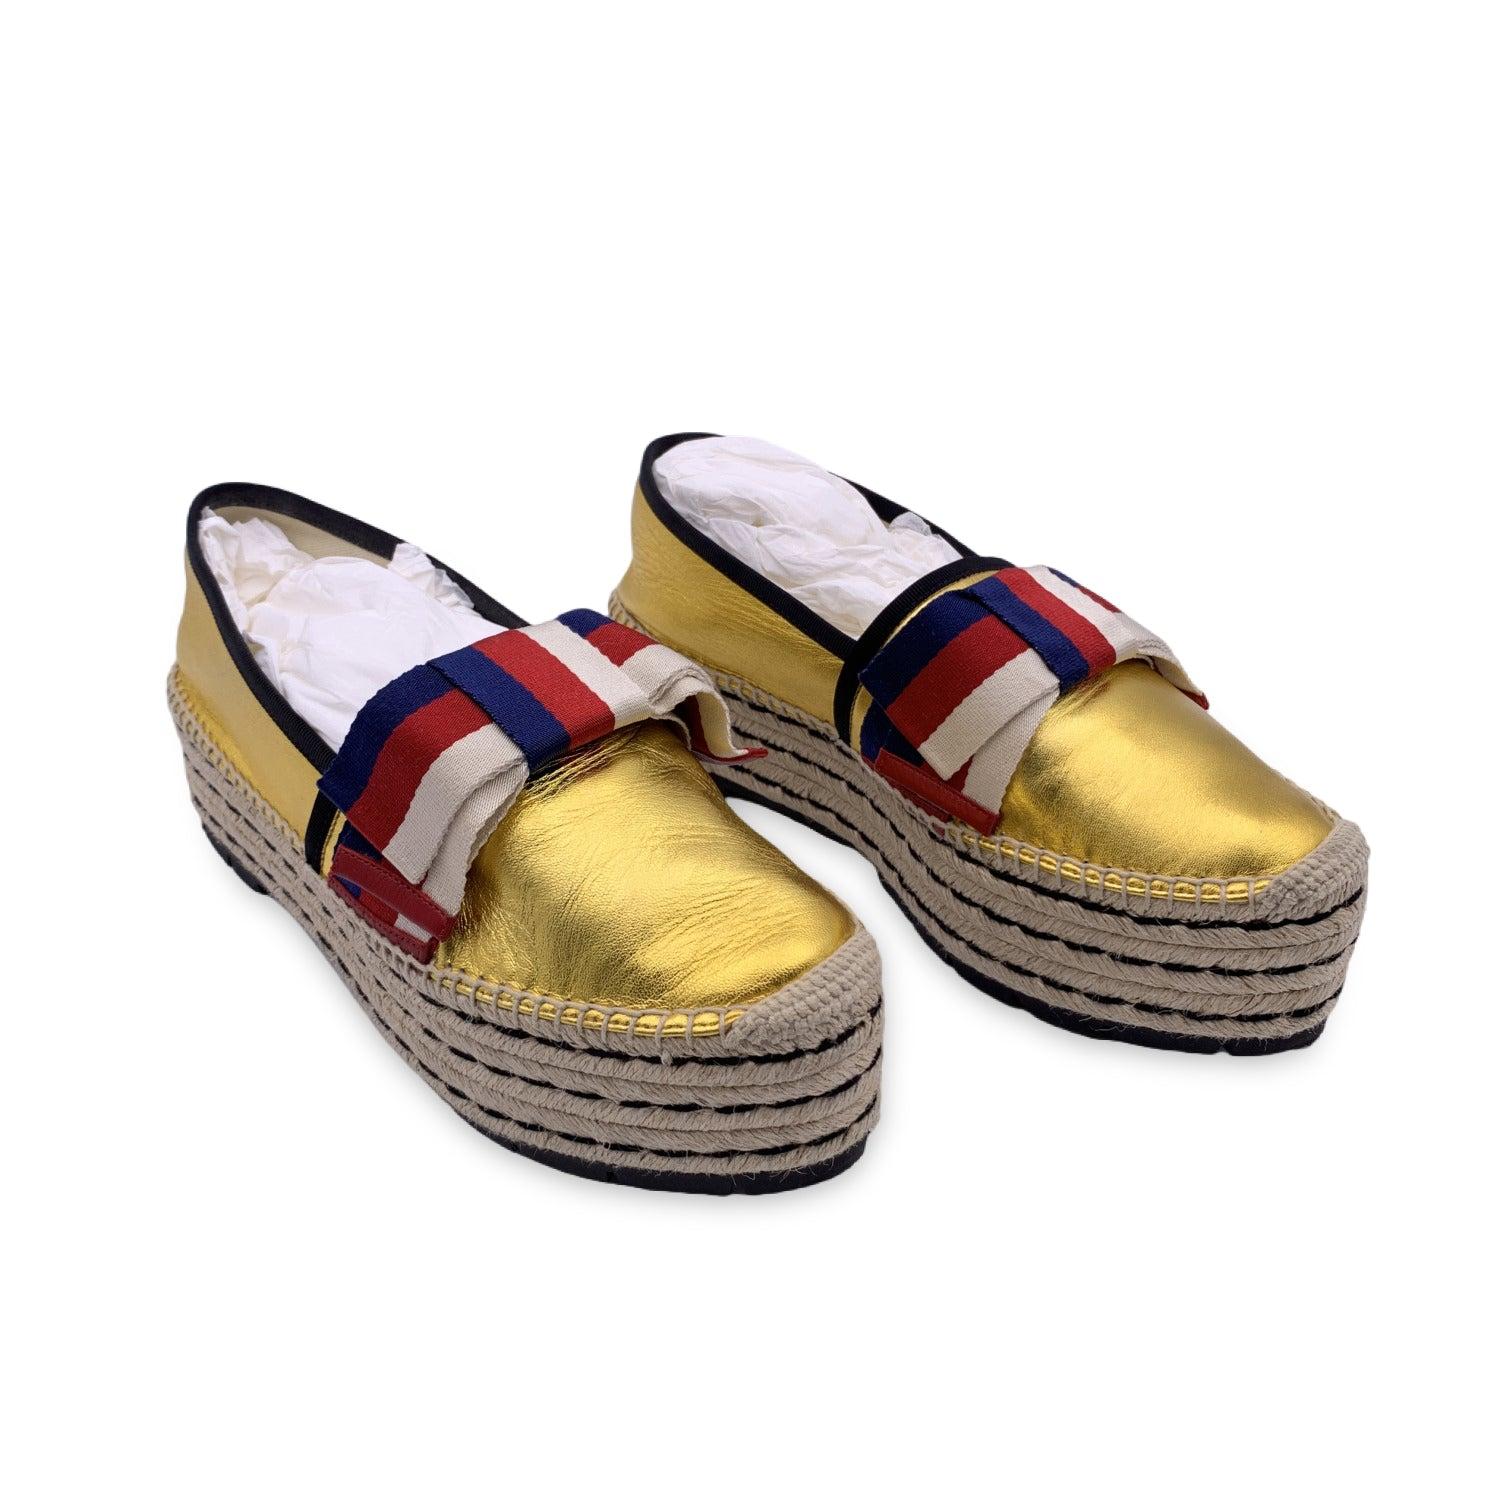 Gucci gold metal leather Espadrille shoes. These shoes are crafted from leather and feature round toes and a white, red and blue Web bow detail across the vamps. Platform height: 2 inches - 5.1 cm. Size 41


Details

MATERIAL: Leather

COLOR: